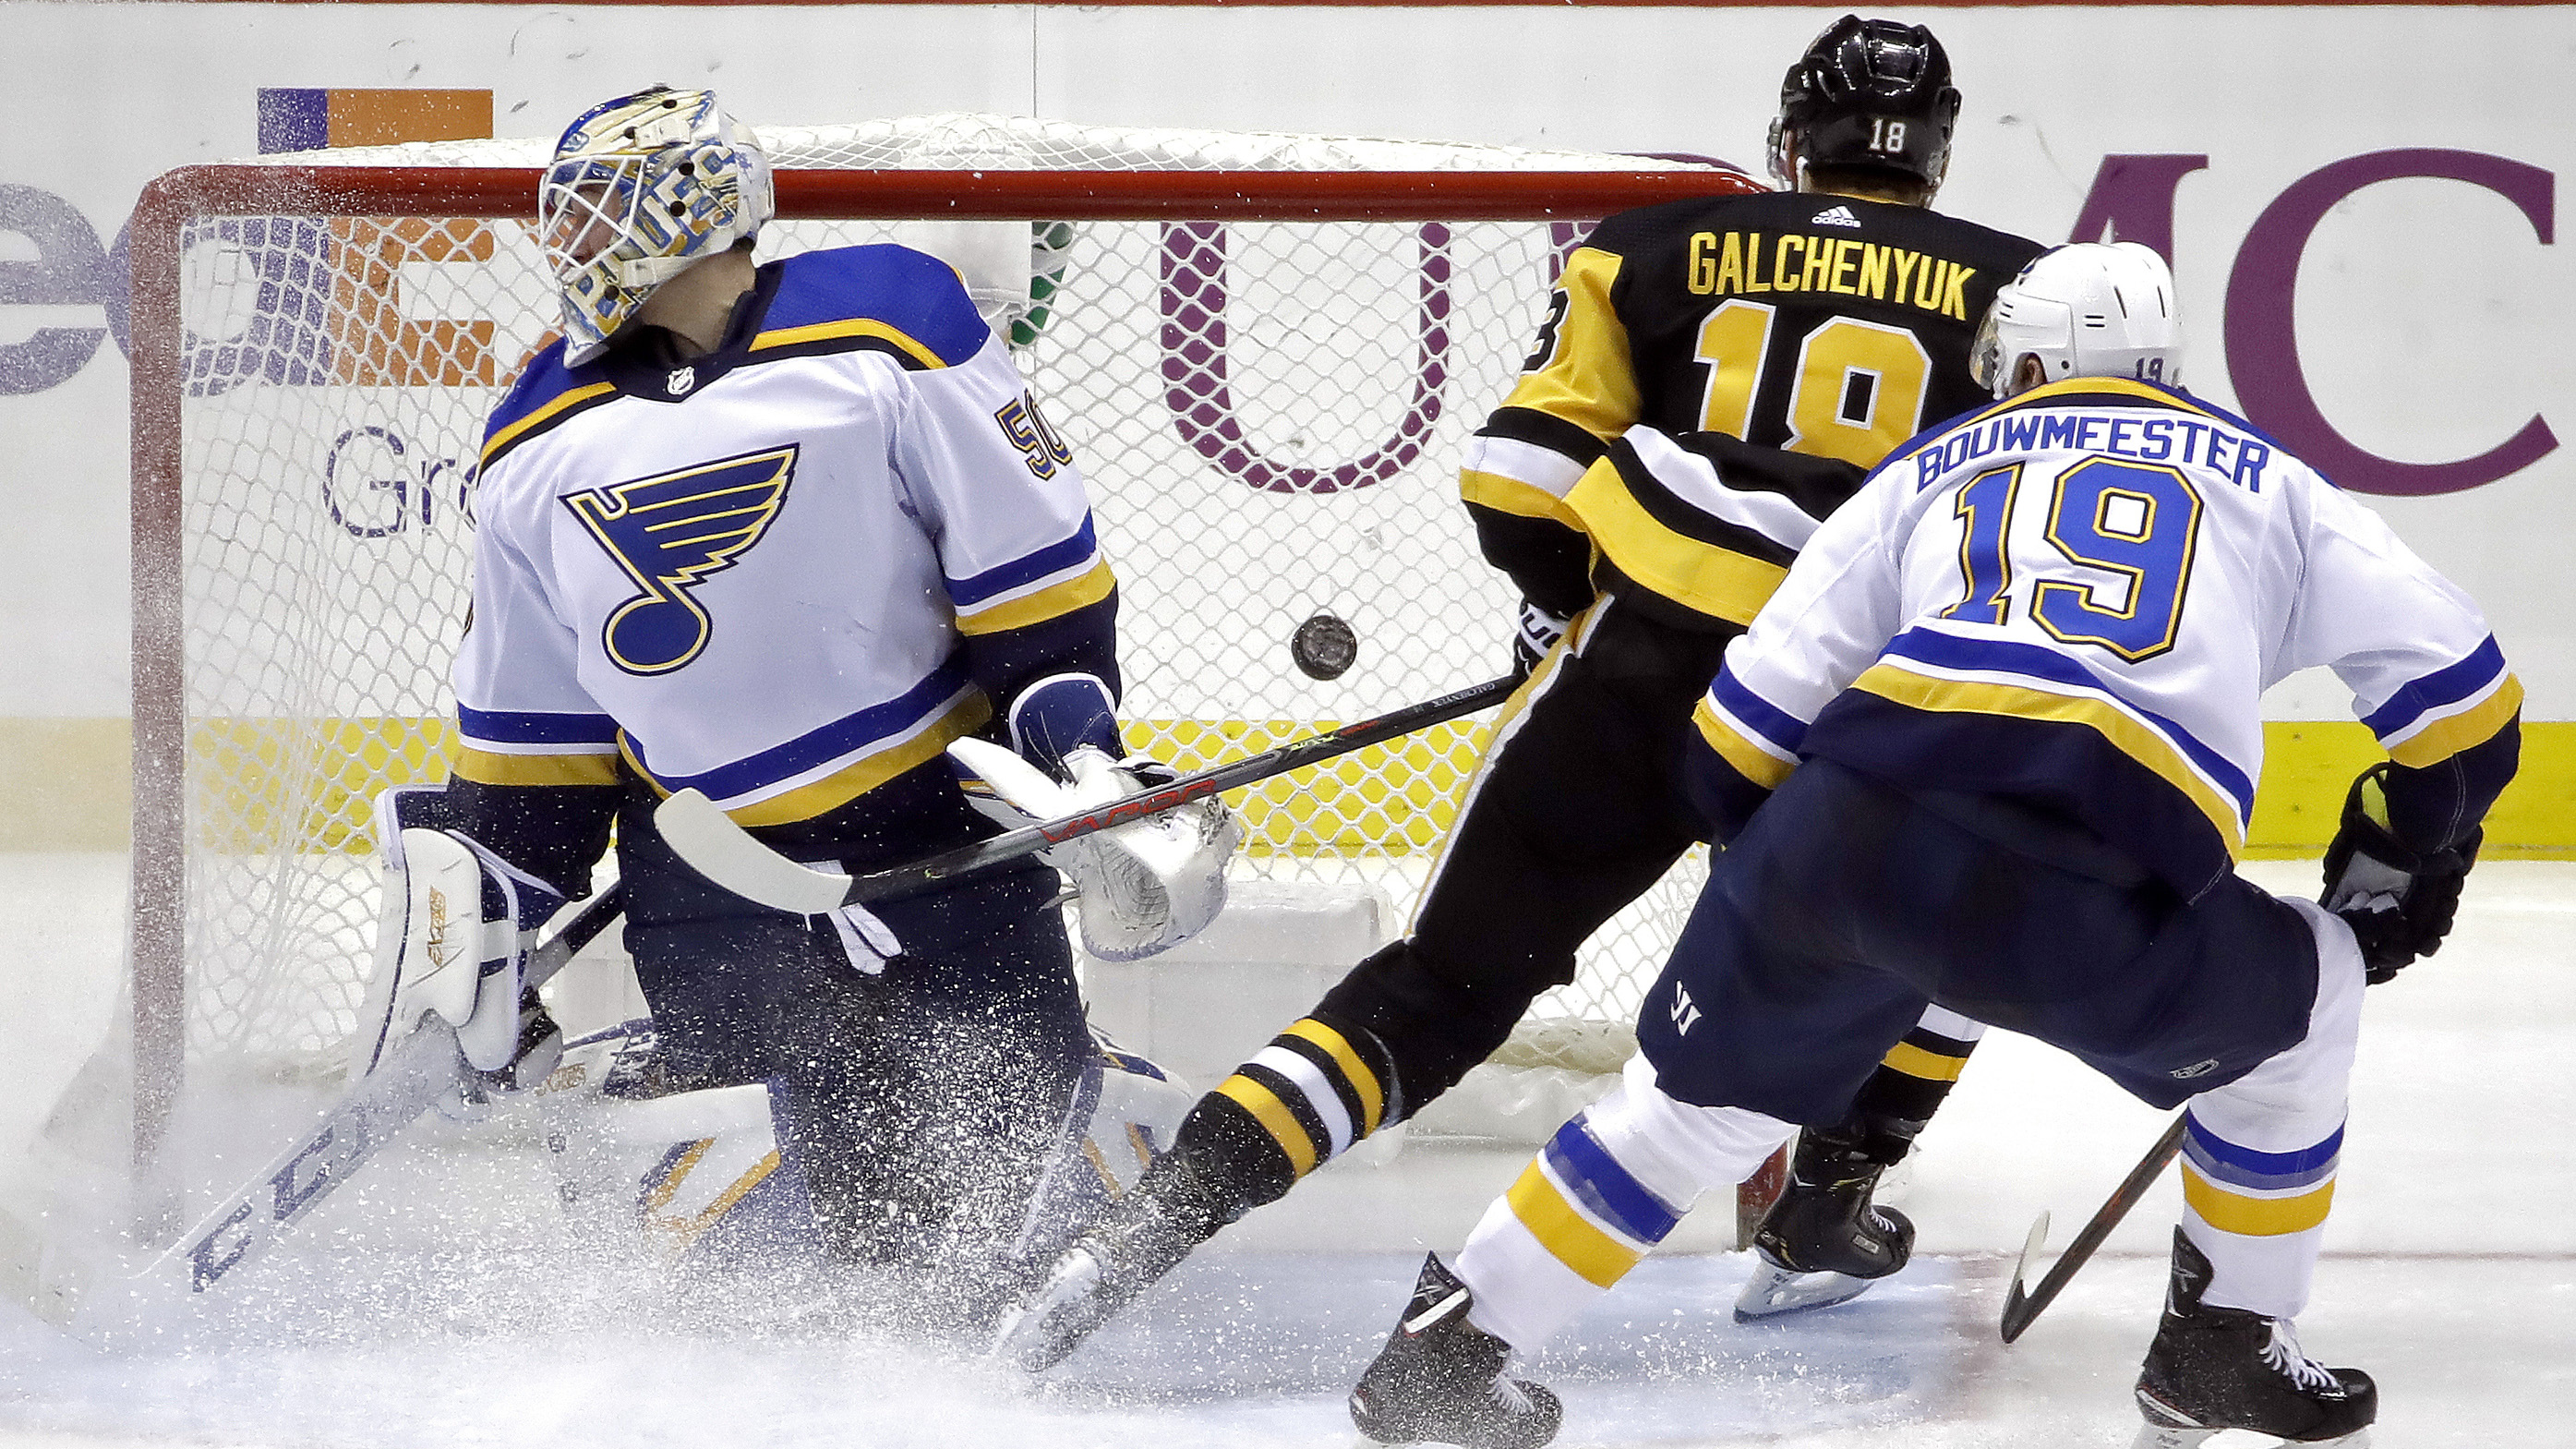 Blues suffer first regulation road loss in more than a month, 3-0 to Penguins